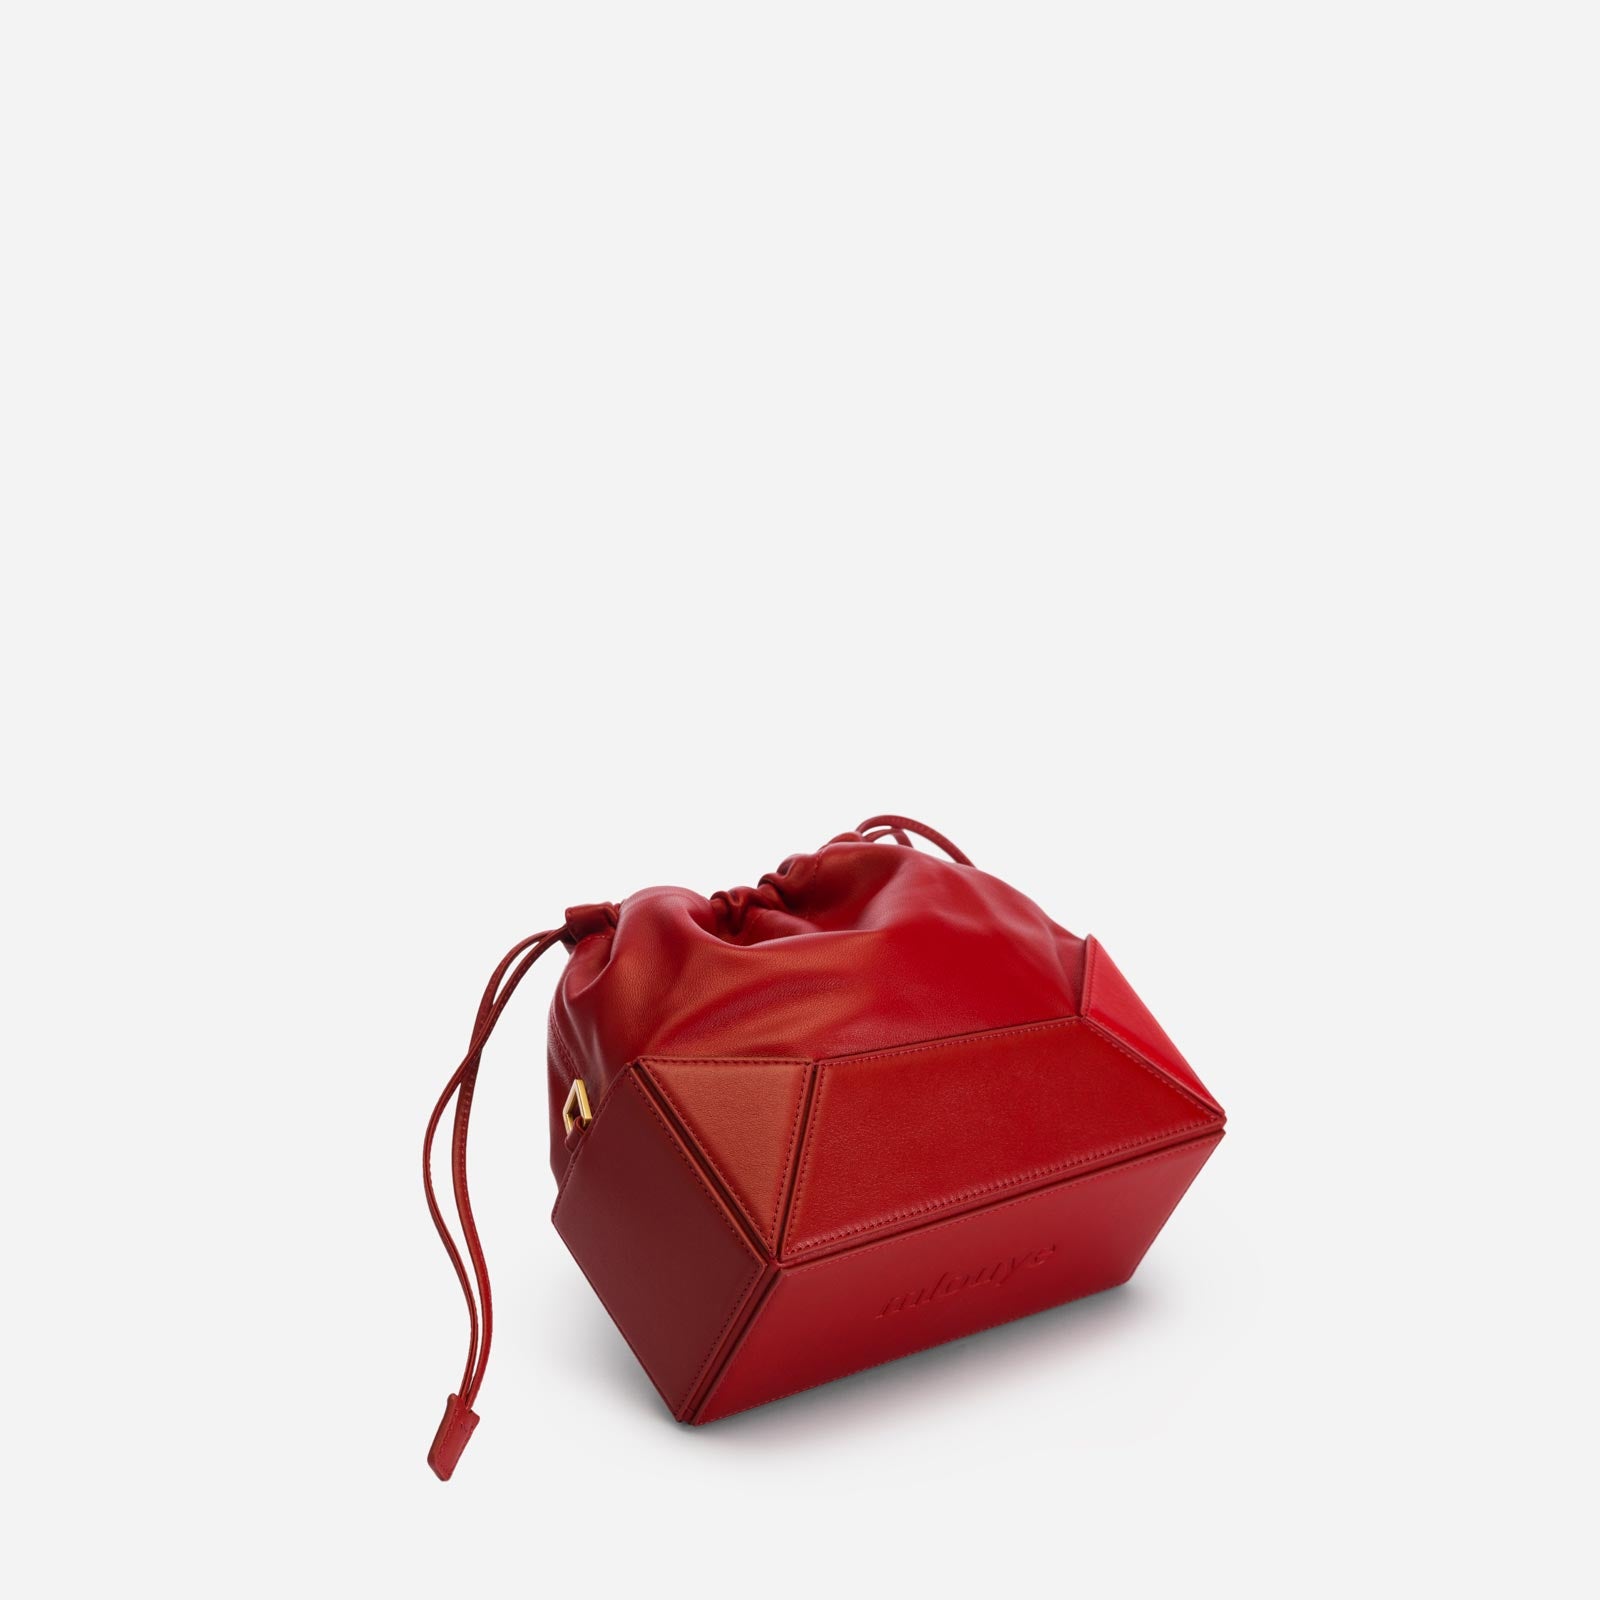 Naomi Pouch - Red